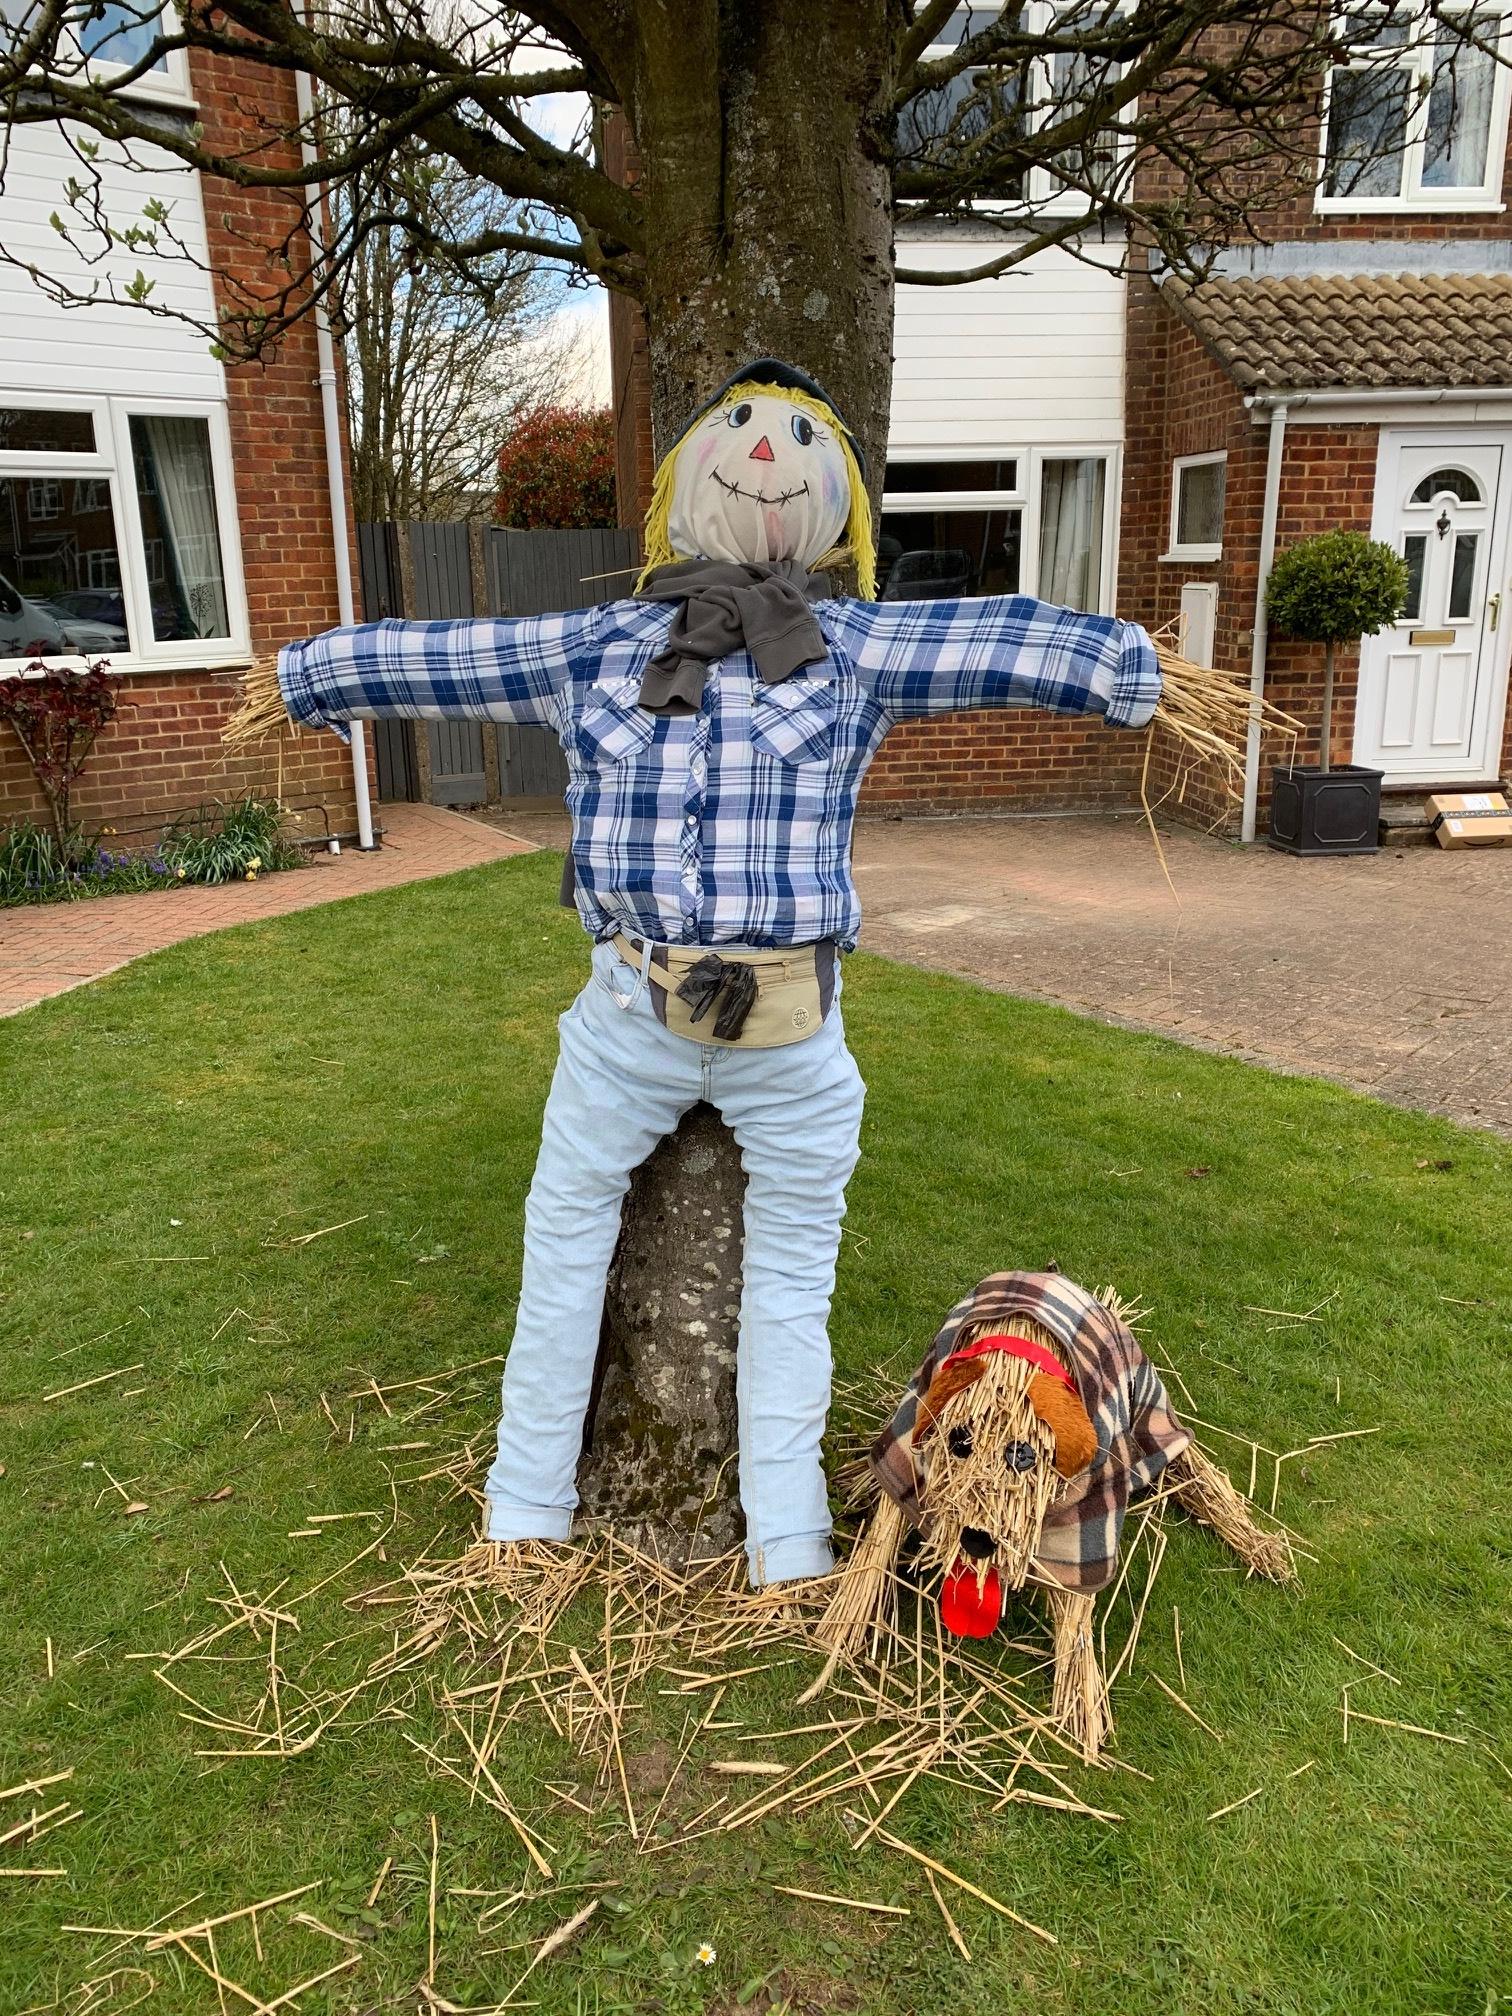 There are over 50 scarecrows 